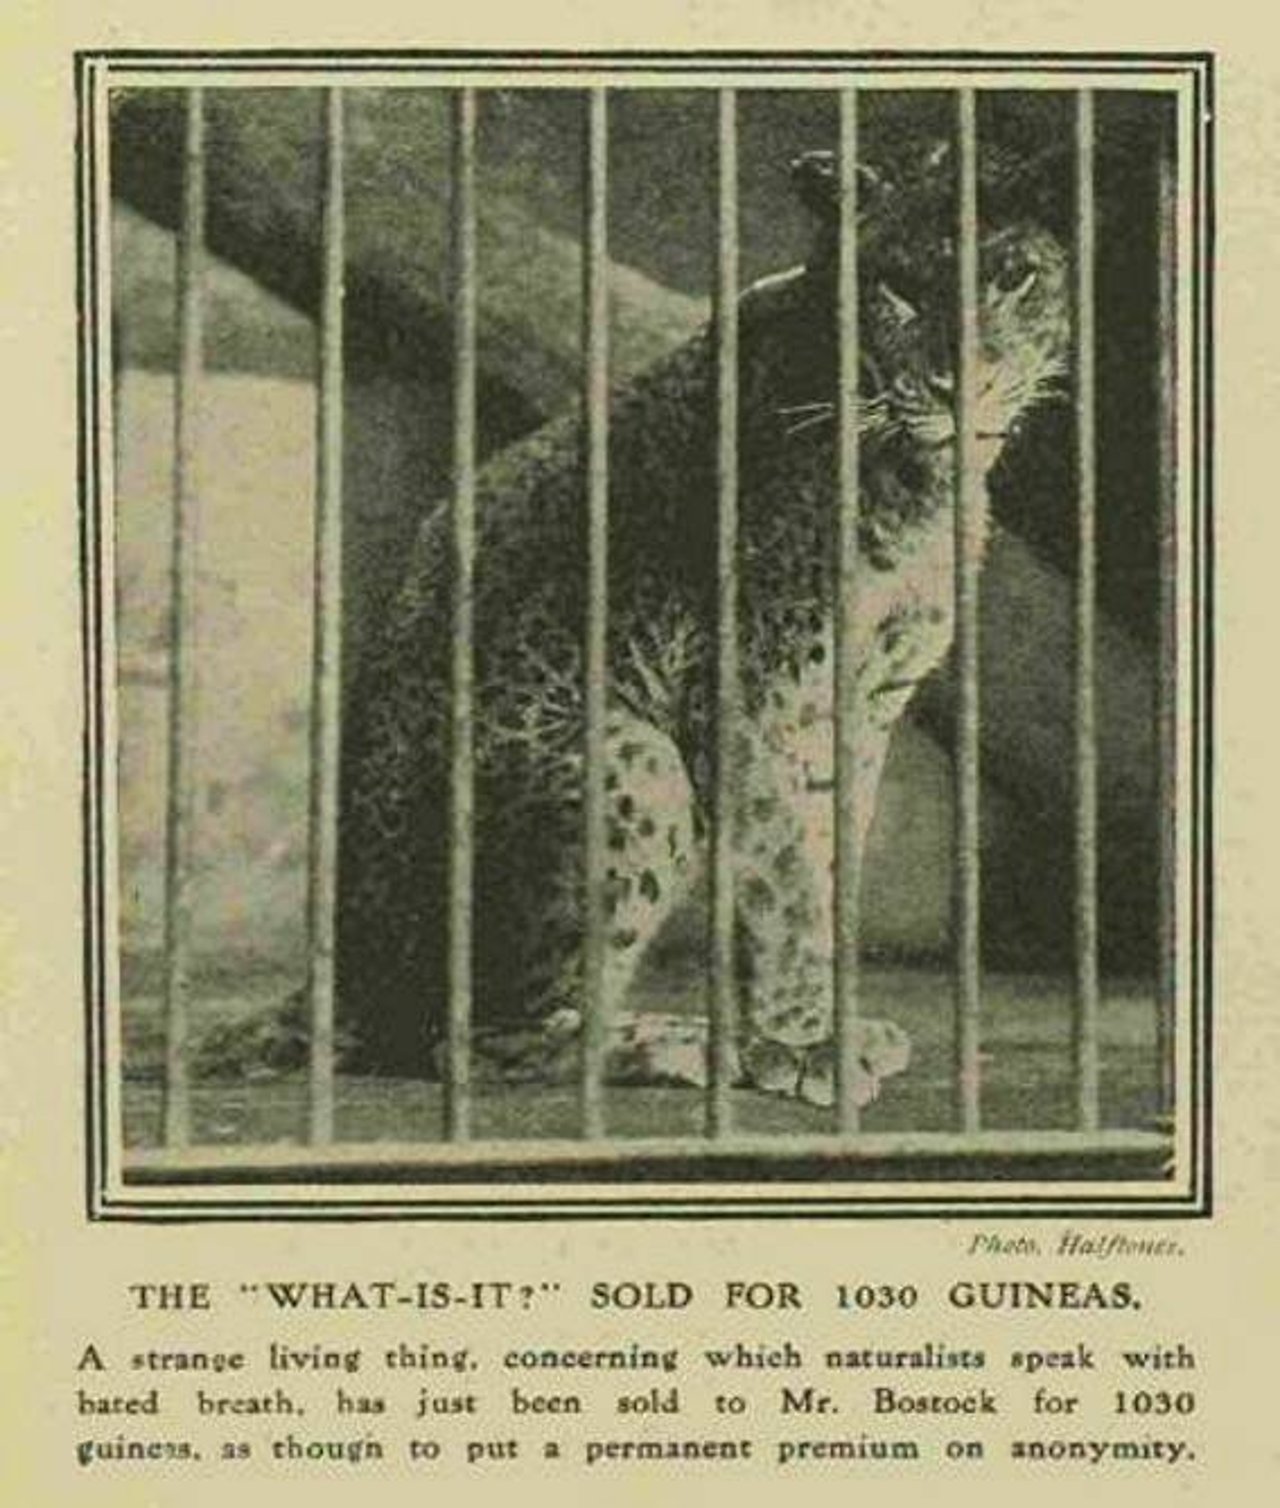  Uneeka, the lion-leopard jaguar hybrid as photographed on May 9, 1908. Photo:  Illustrated London News, discovered by Karl Shuker